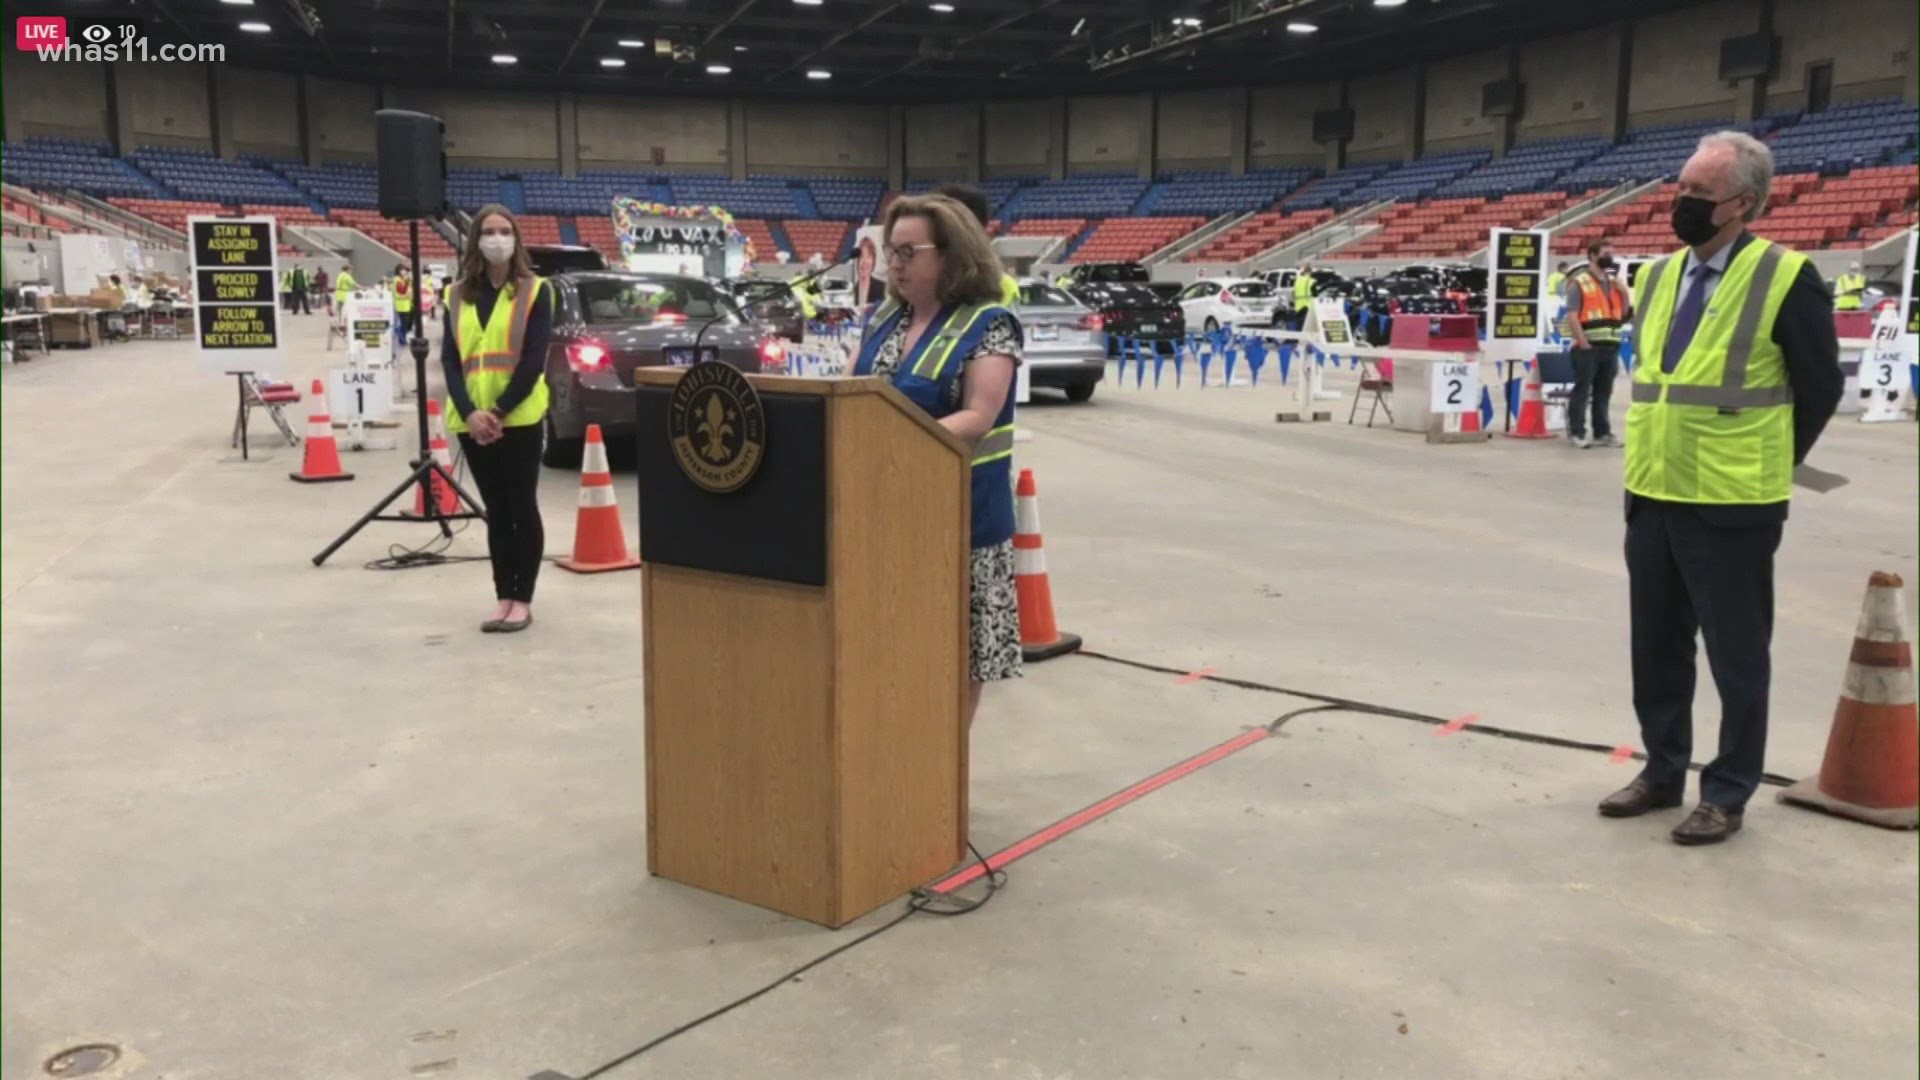 Days before they halt operations at Broadbent Arena, officials announced LouVax will go mobile to help underserved portions of the community.